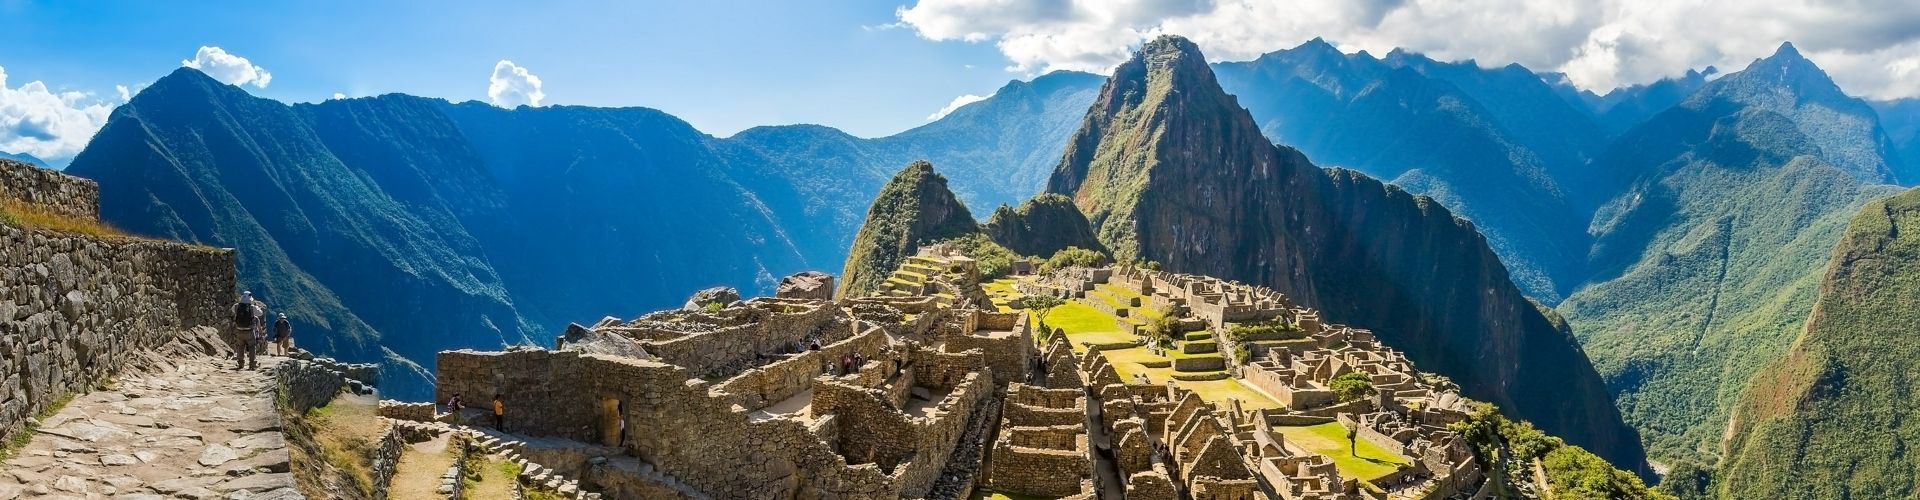 The Beginner's Guide to the Inca Trail Hike